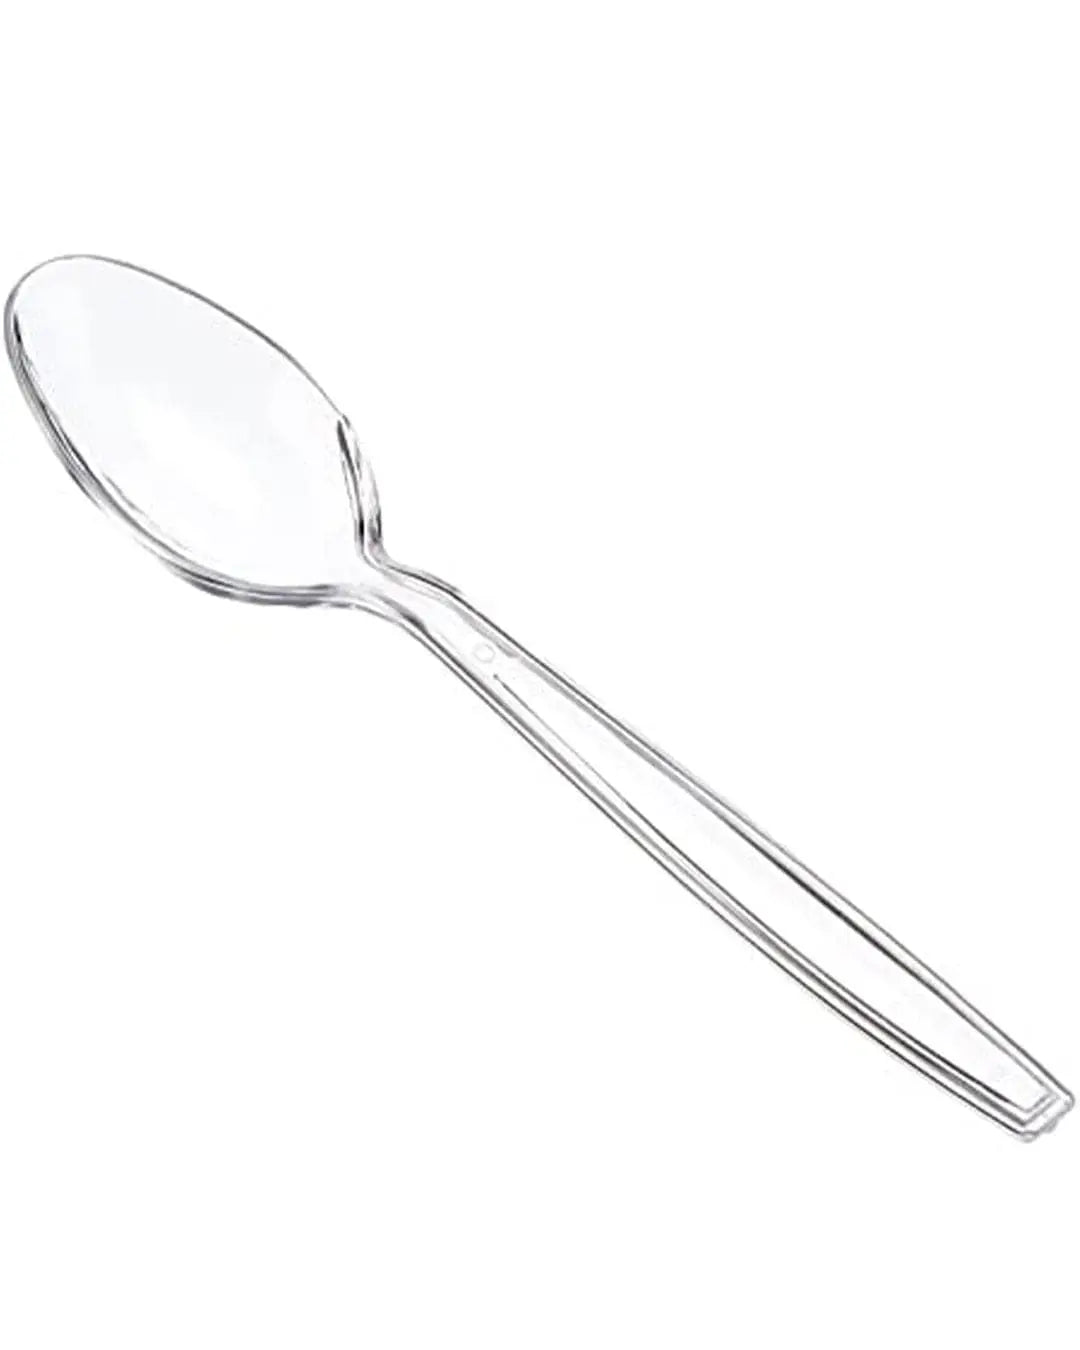 Clear Plastic Spoons Pack Size 50 Partyware 5033298012764